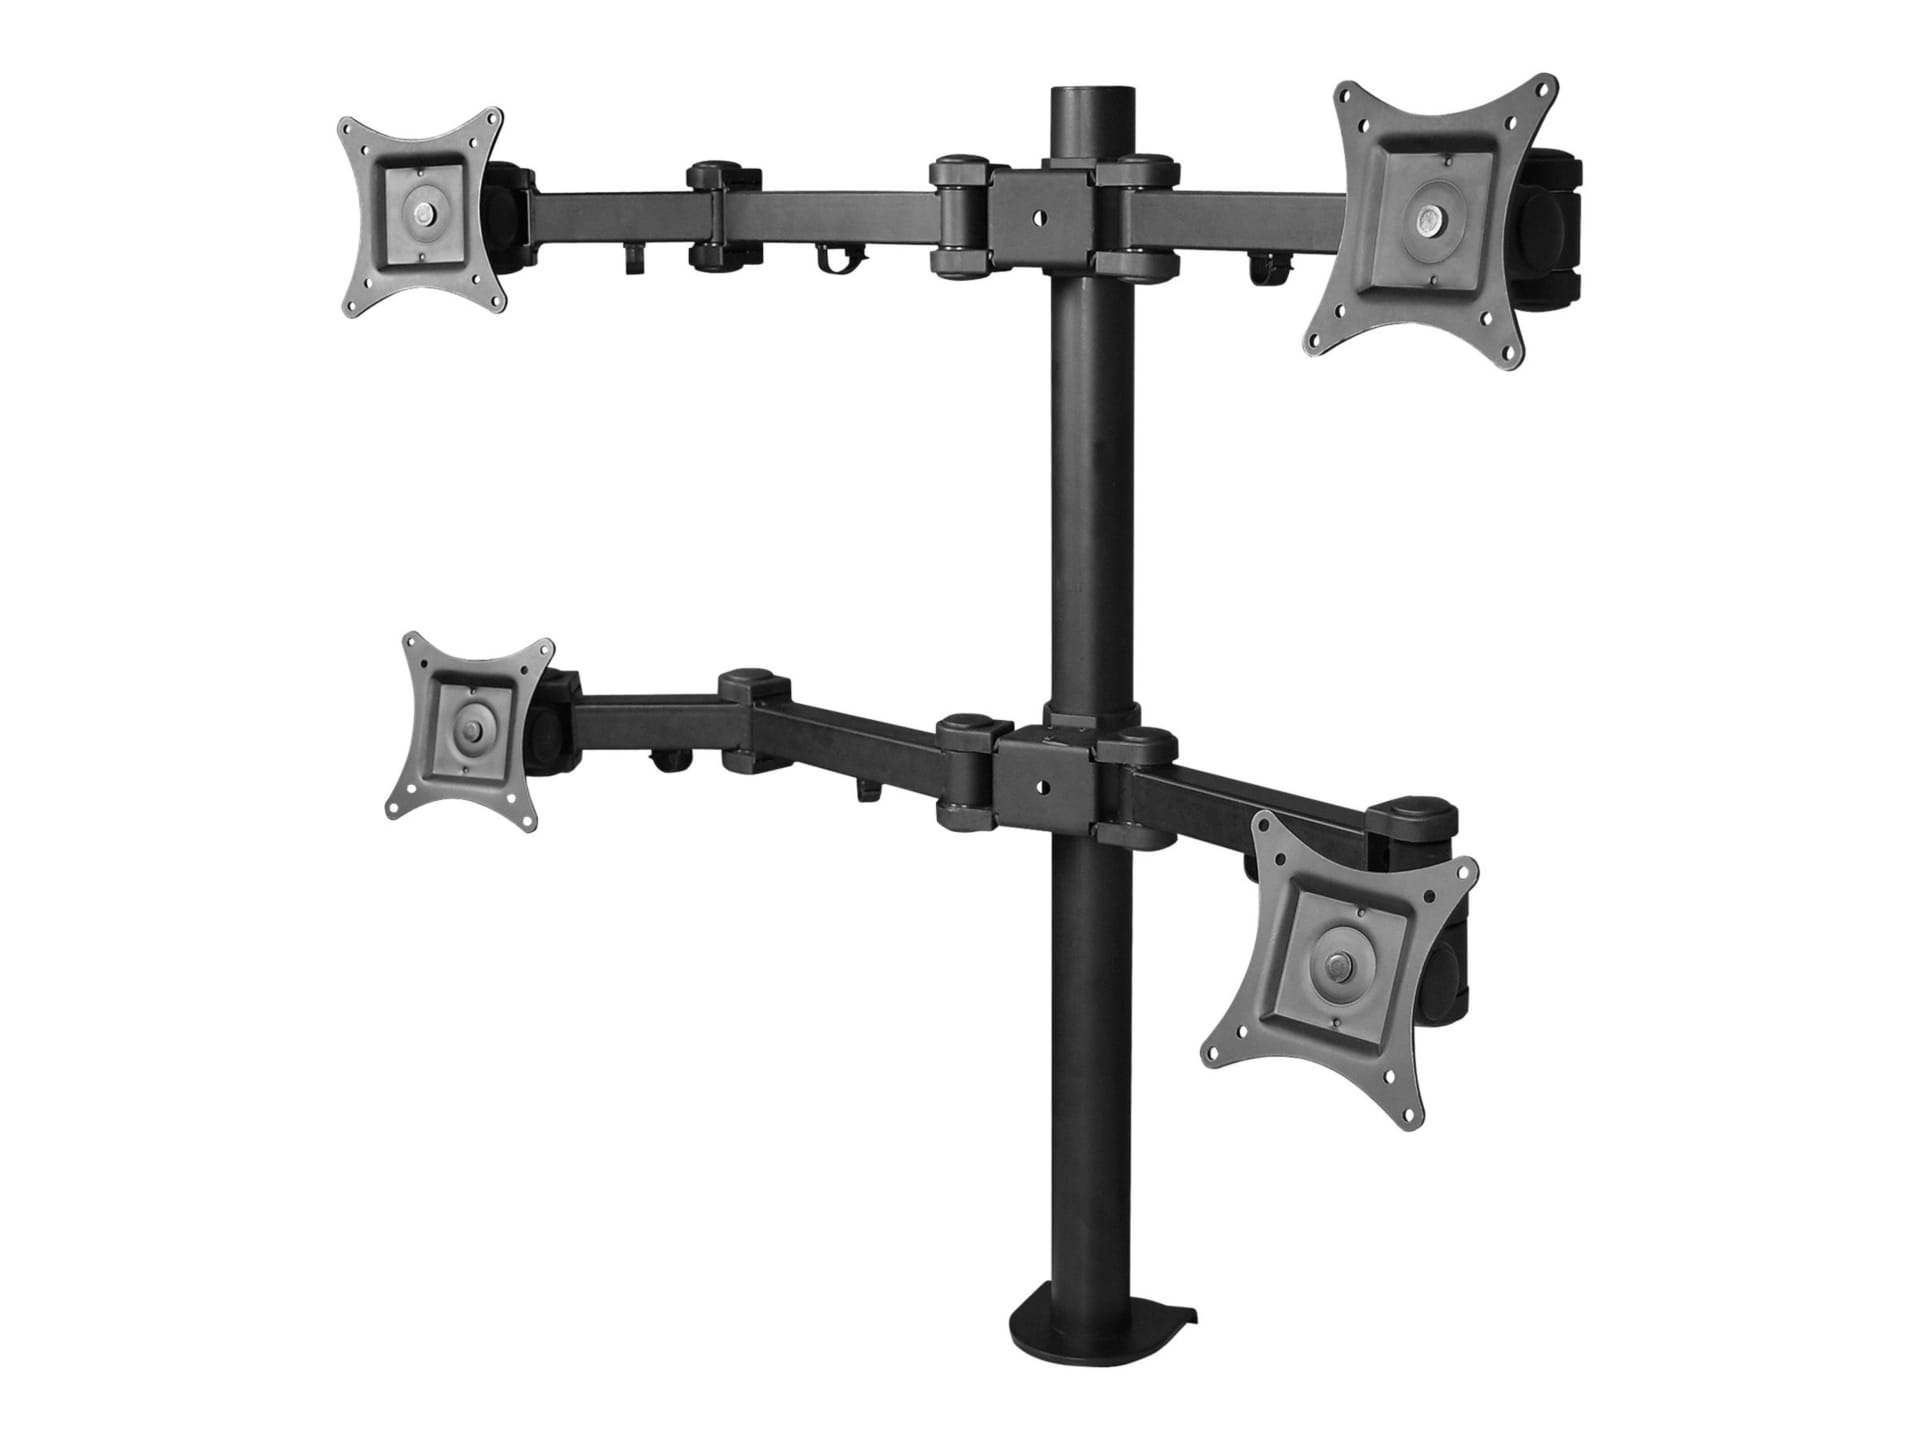 SIIG Articulating Quad Monitor Desk Mount - 13" to 27" mounting kit - full-